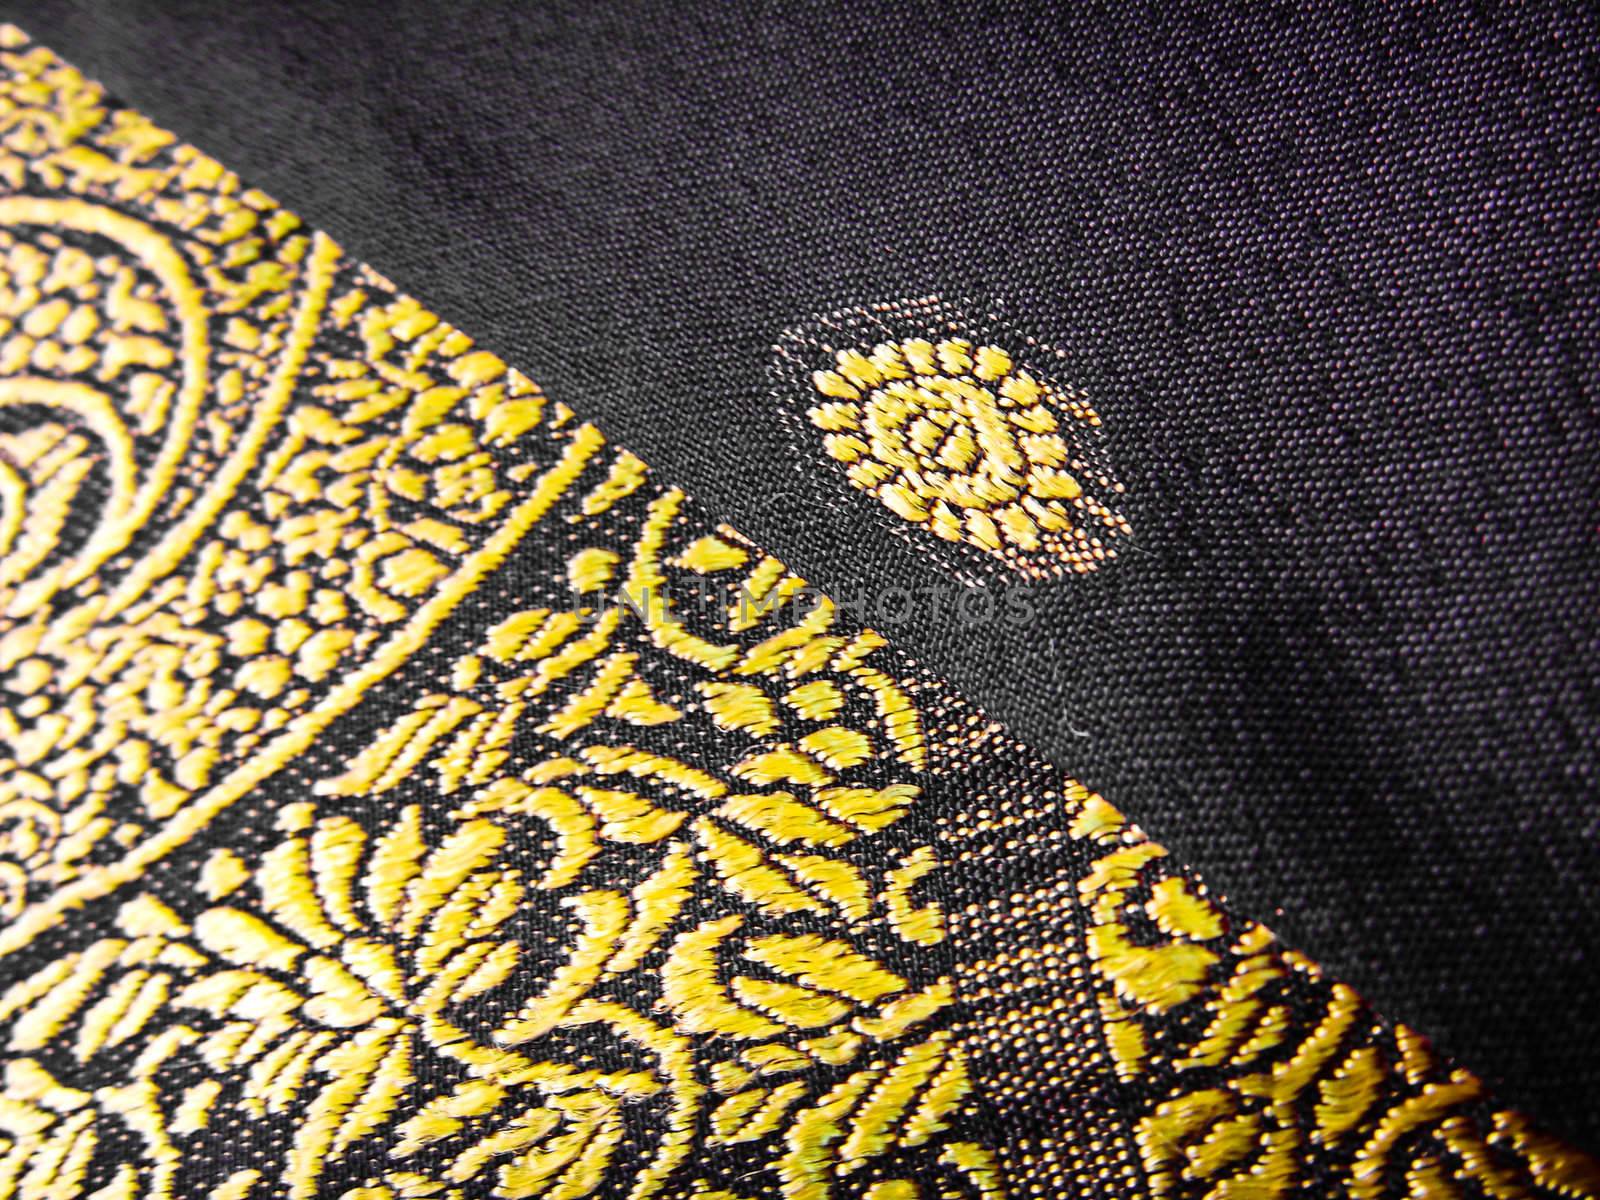 A closeup of a yellow and black traditional indian fabric, known as the sari/saree